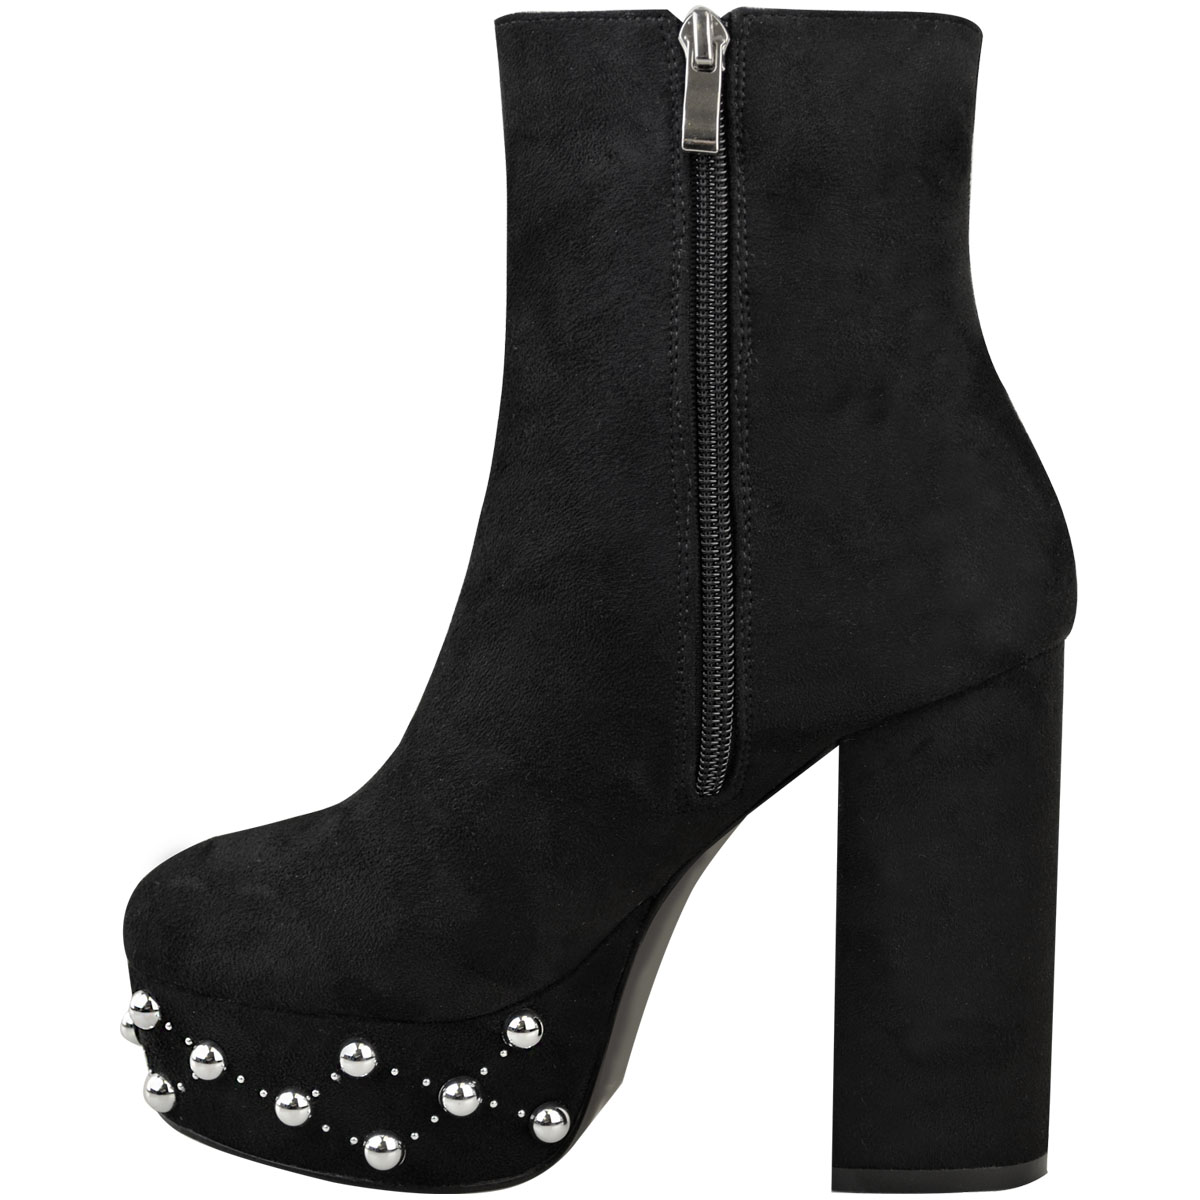 Womens Ladies Chunky Platform Ankle Boots Studded Block High Heels Shoes Size 